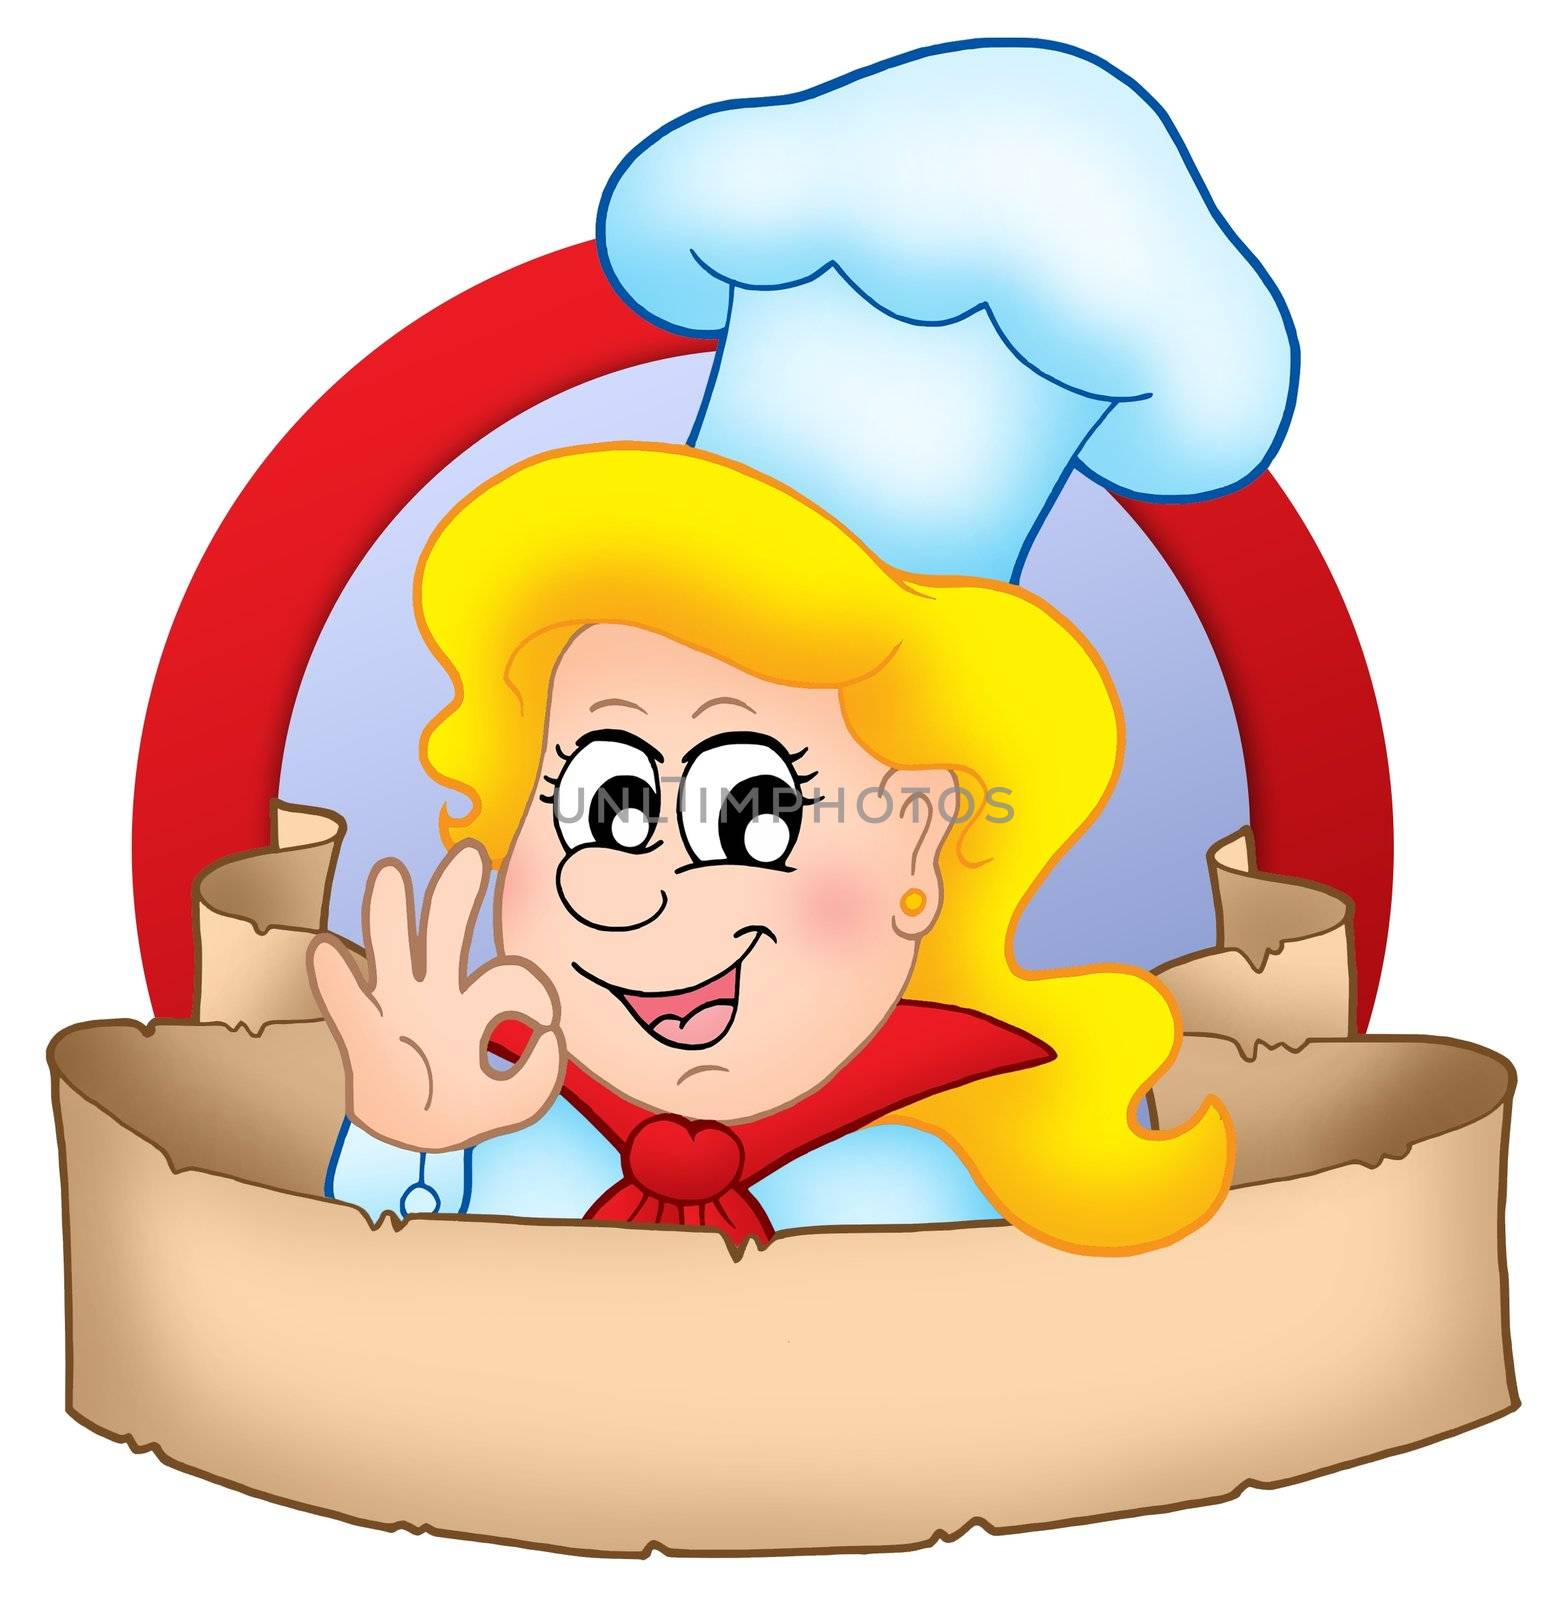 Cartoon chef woman in circle with banner by clairev